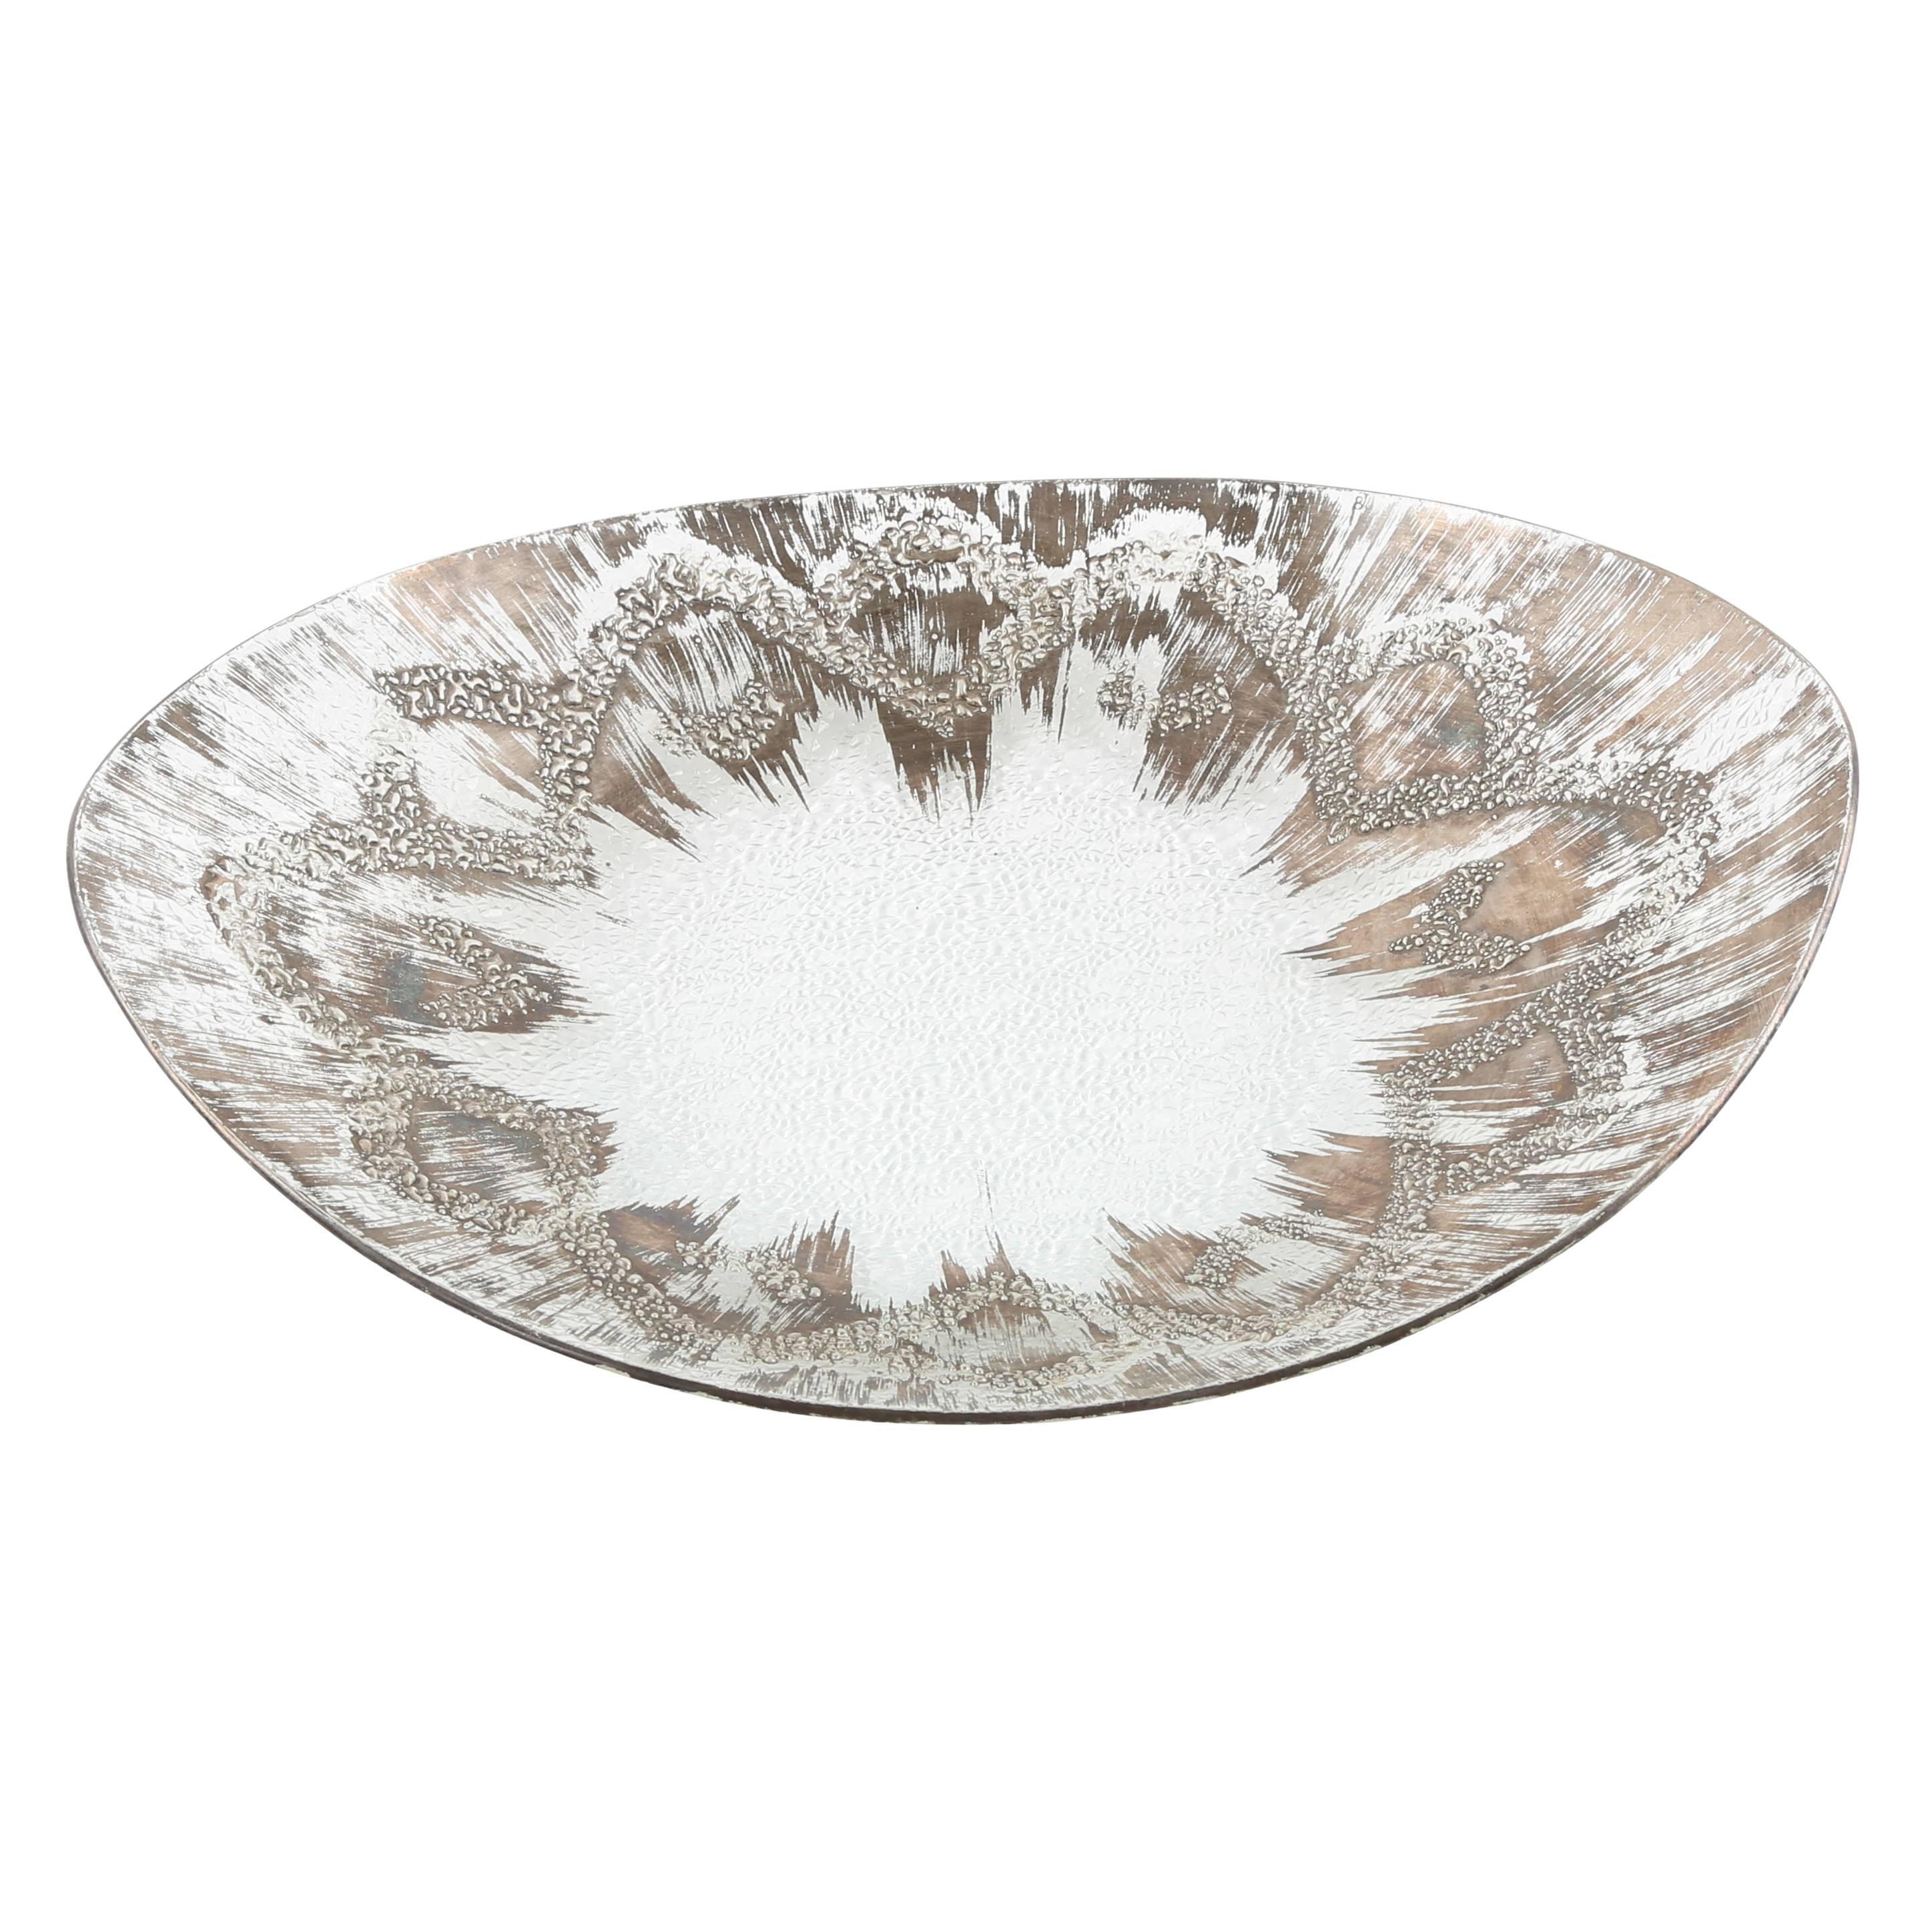 Dorothy Thorpe Sterling-on-crystal Ovoid Bowl, circa 1960s